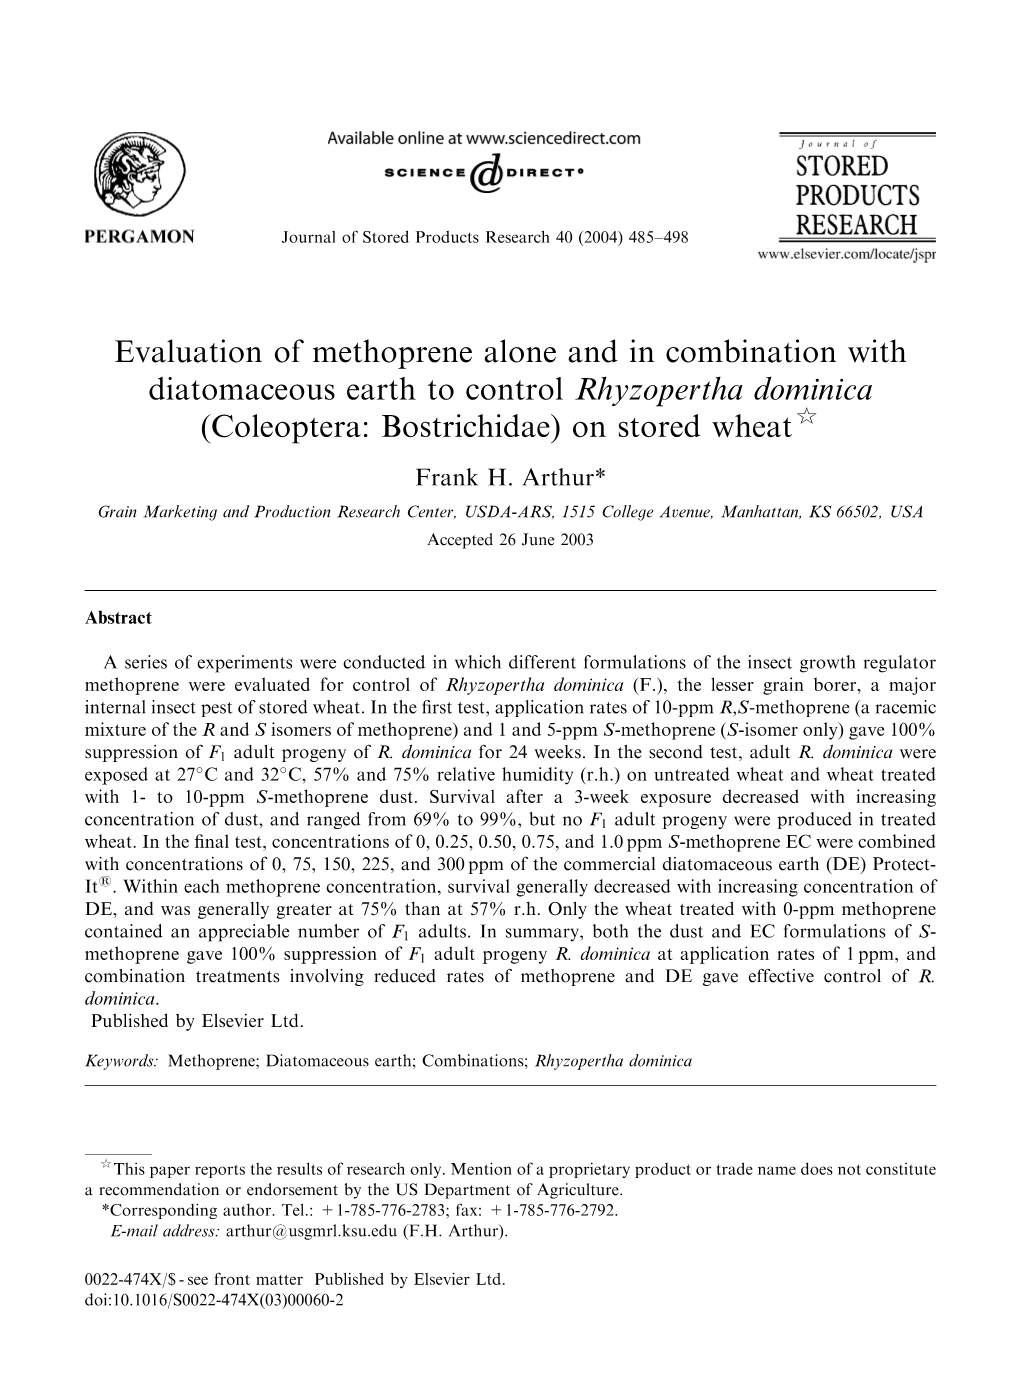 Evaluation of Methoprene Alone and in Combination with Diatomaceous Earth to Control Rhyzopertha Dominica (Coleoptera: Bostrichidae) on Stored Wheat$ Frank H